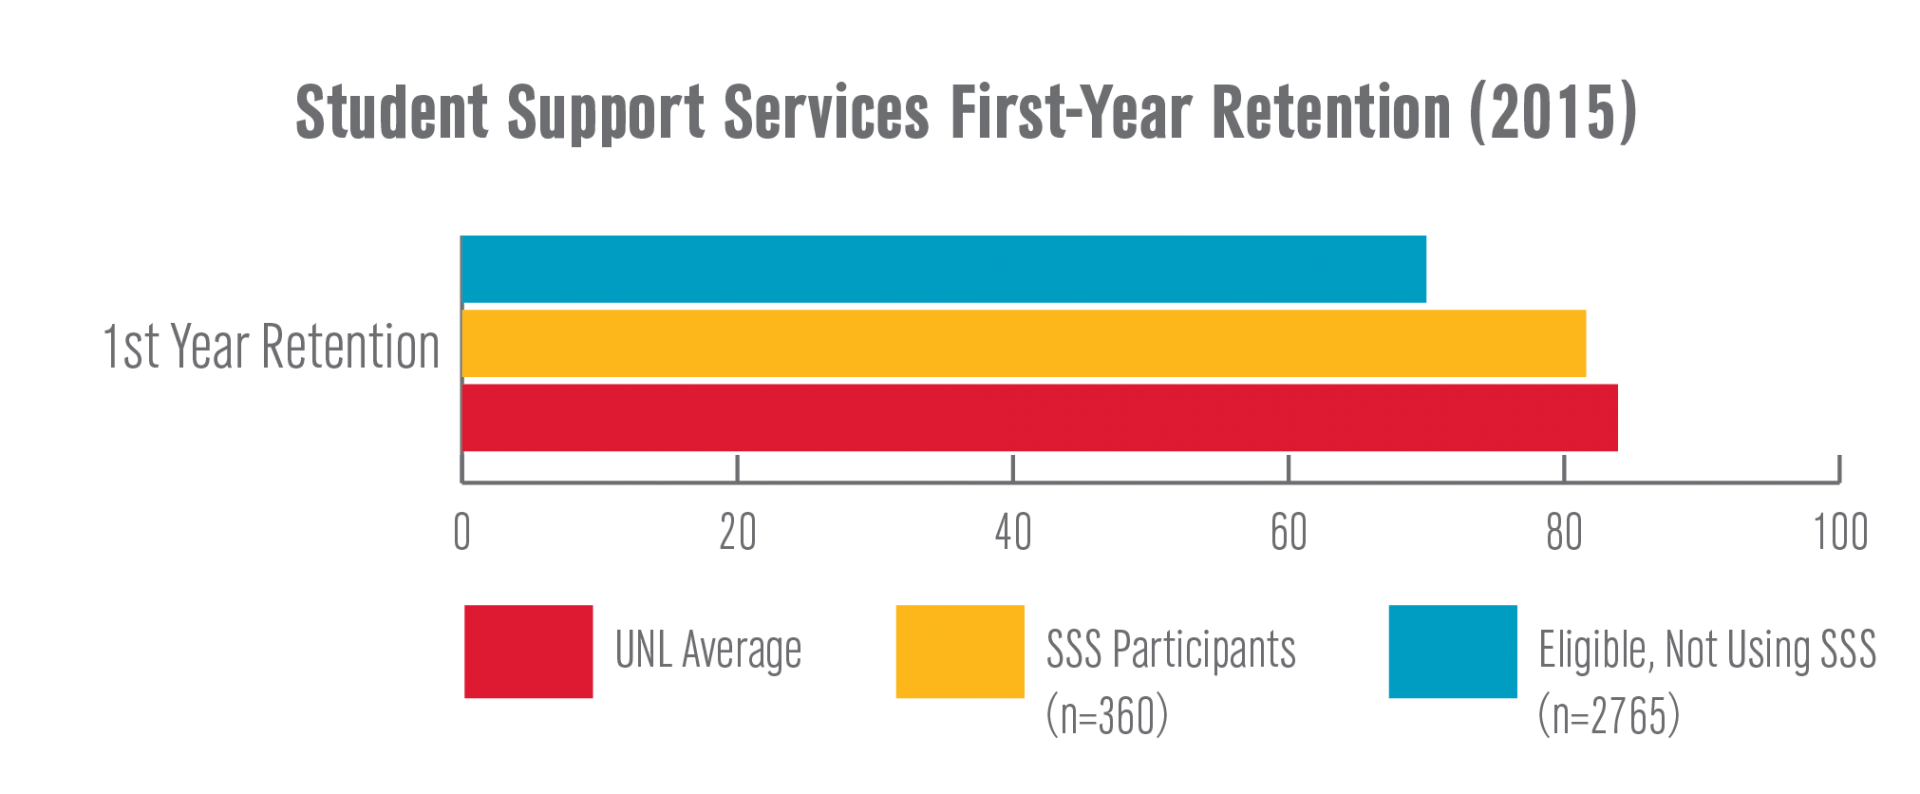 Chart: Student Support Services First-Year Retention (2015)